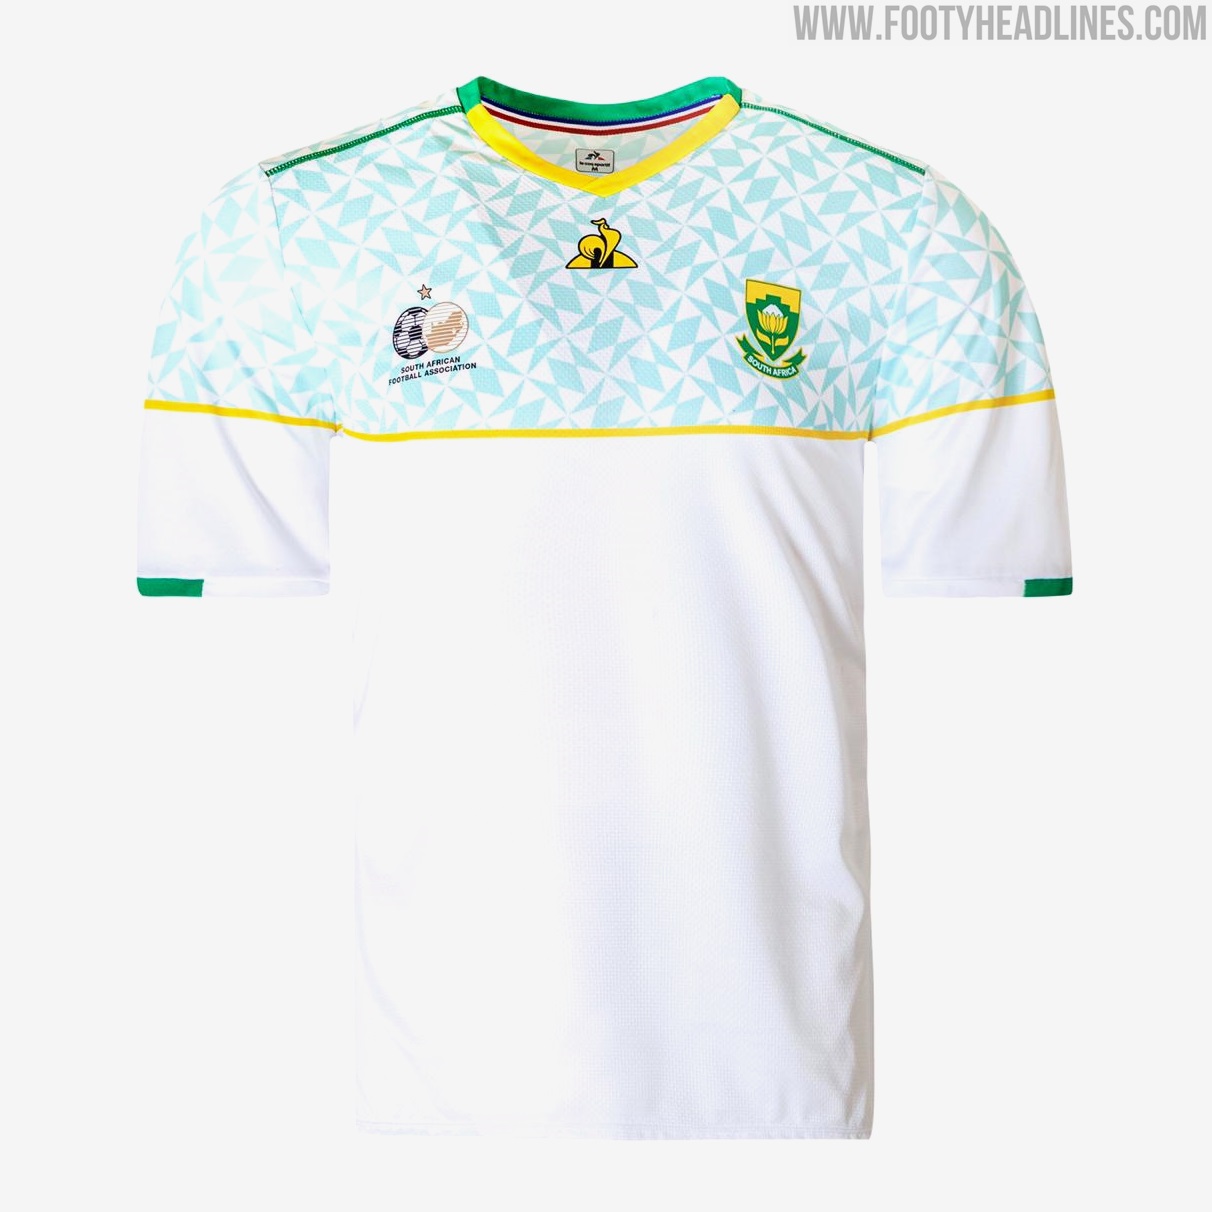 Le Coq Sportif Africa Home, & Third Kits Revealed - Footy